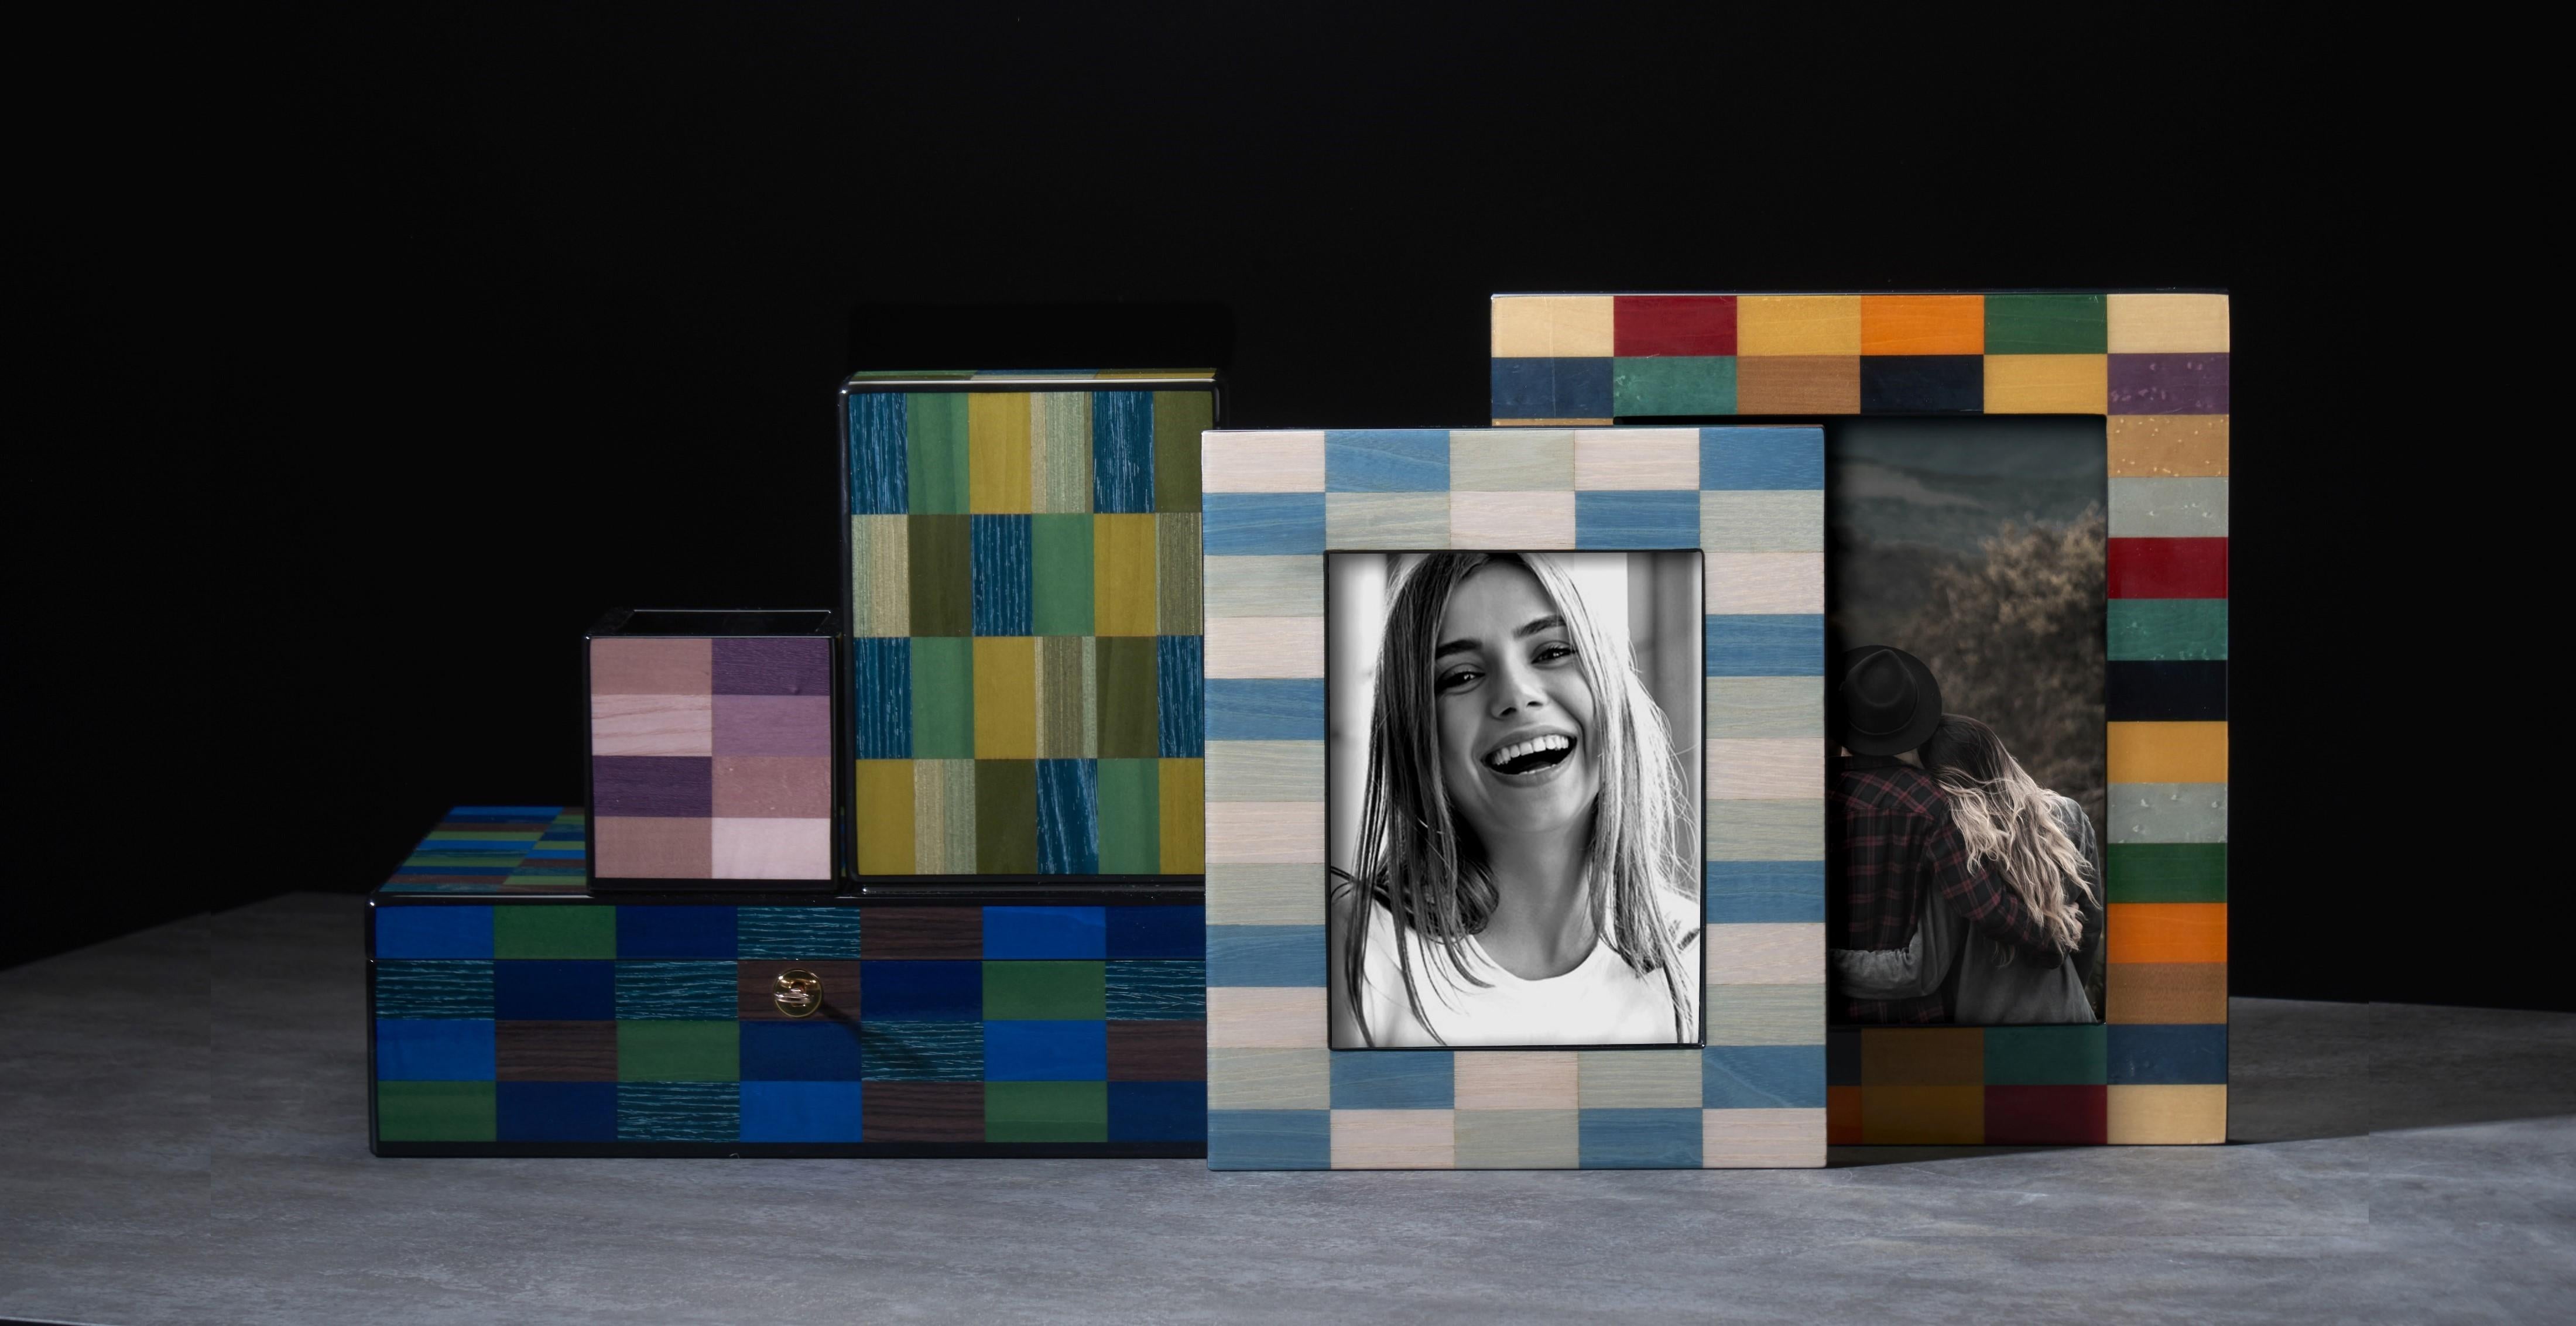 An original and elegant gift idea for a loved one, this photo frame is part of the Venezia Mestre Collection of design objects characterized by geometric motifs inspired by modern art. Entirely handcrafted from wood, this photo frame features a bold